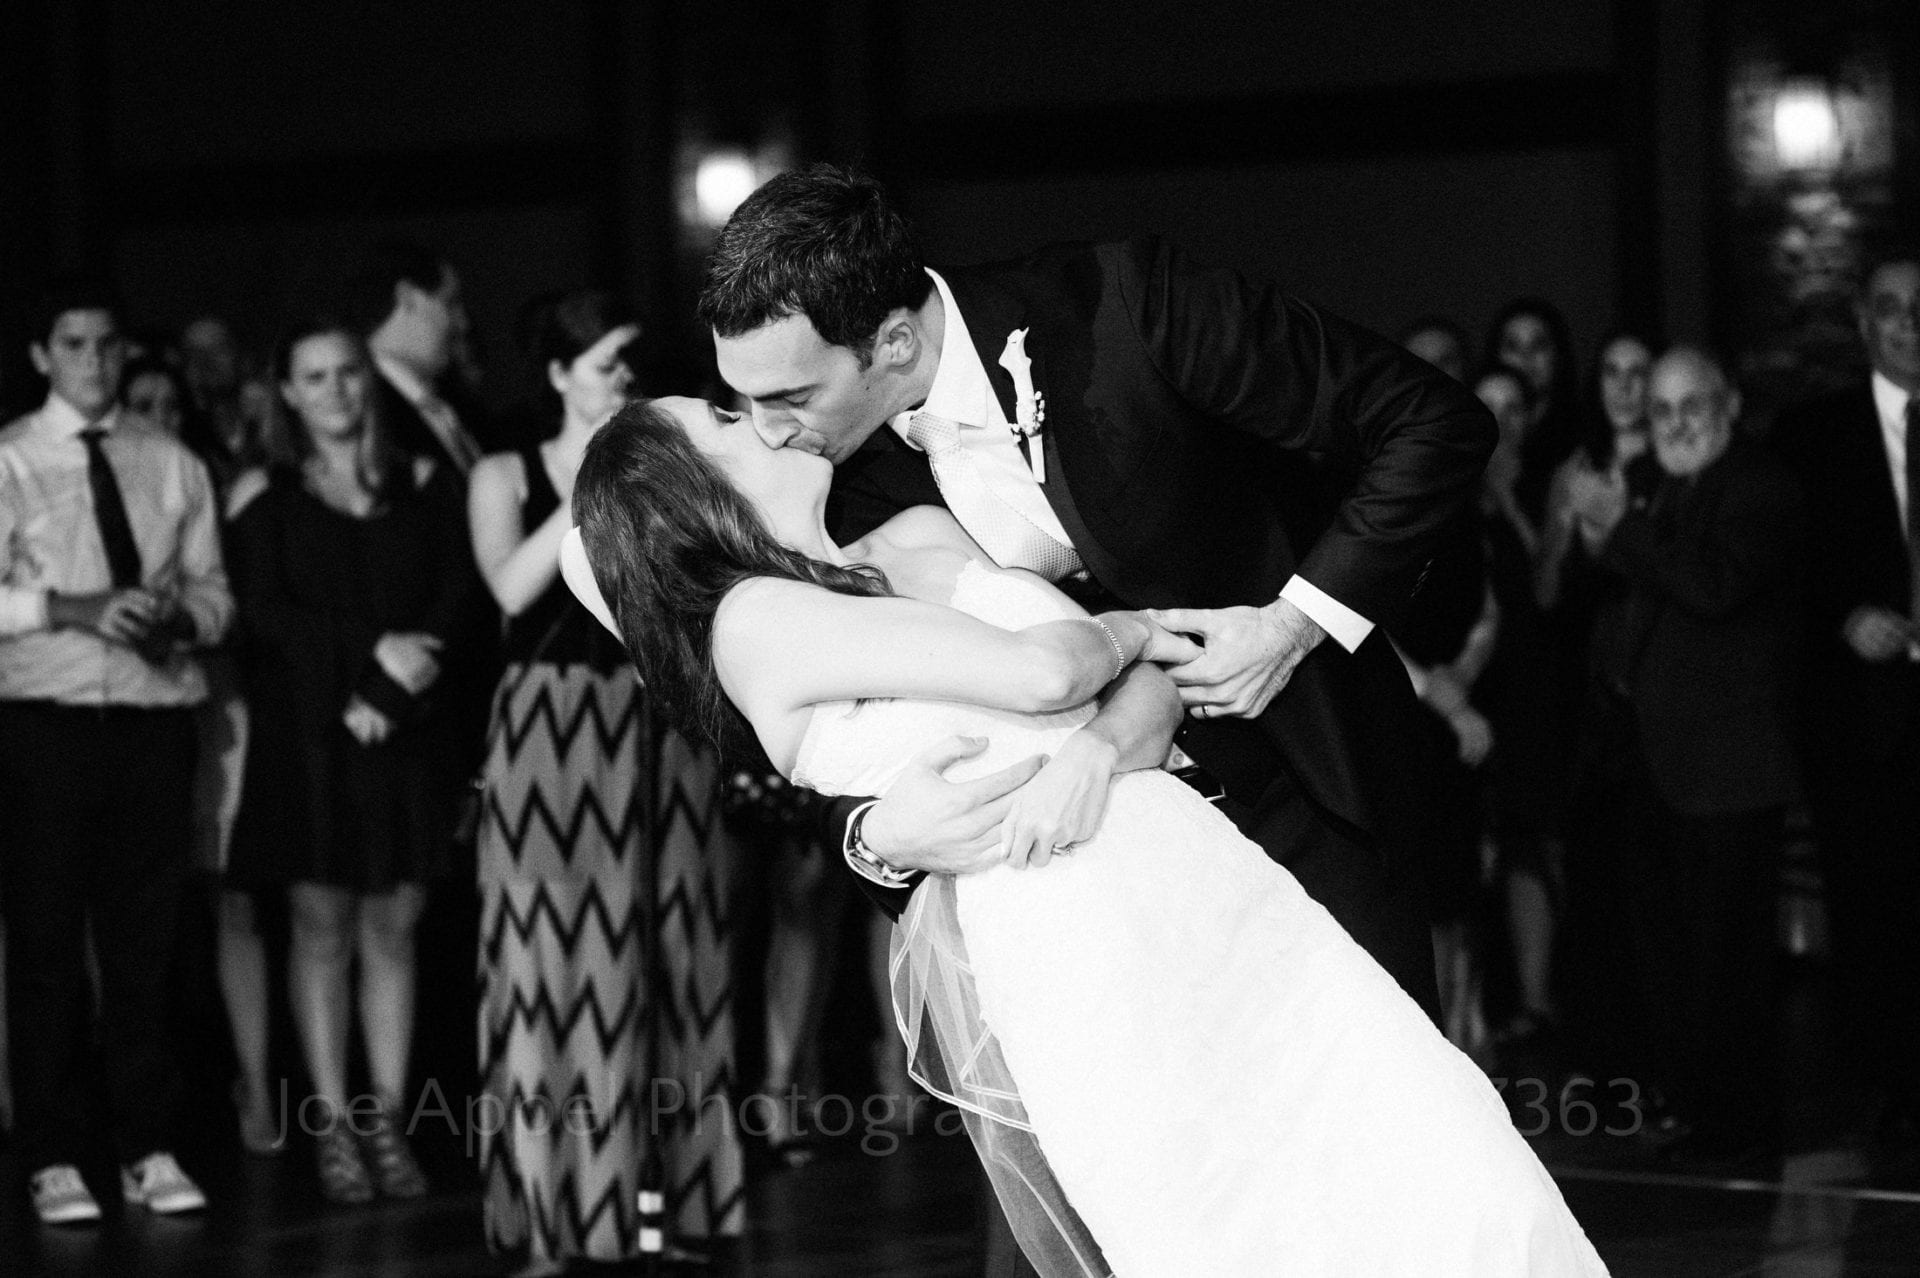 A groom dips his bride as they kiss at the end of their first dance.